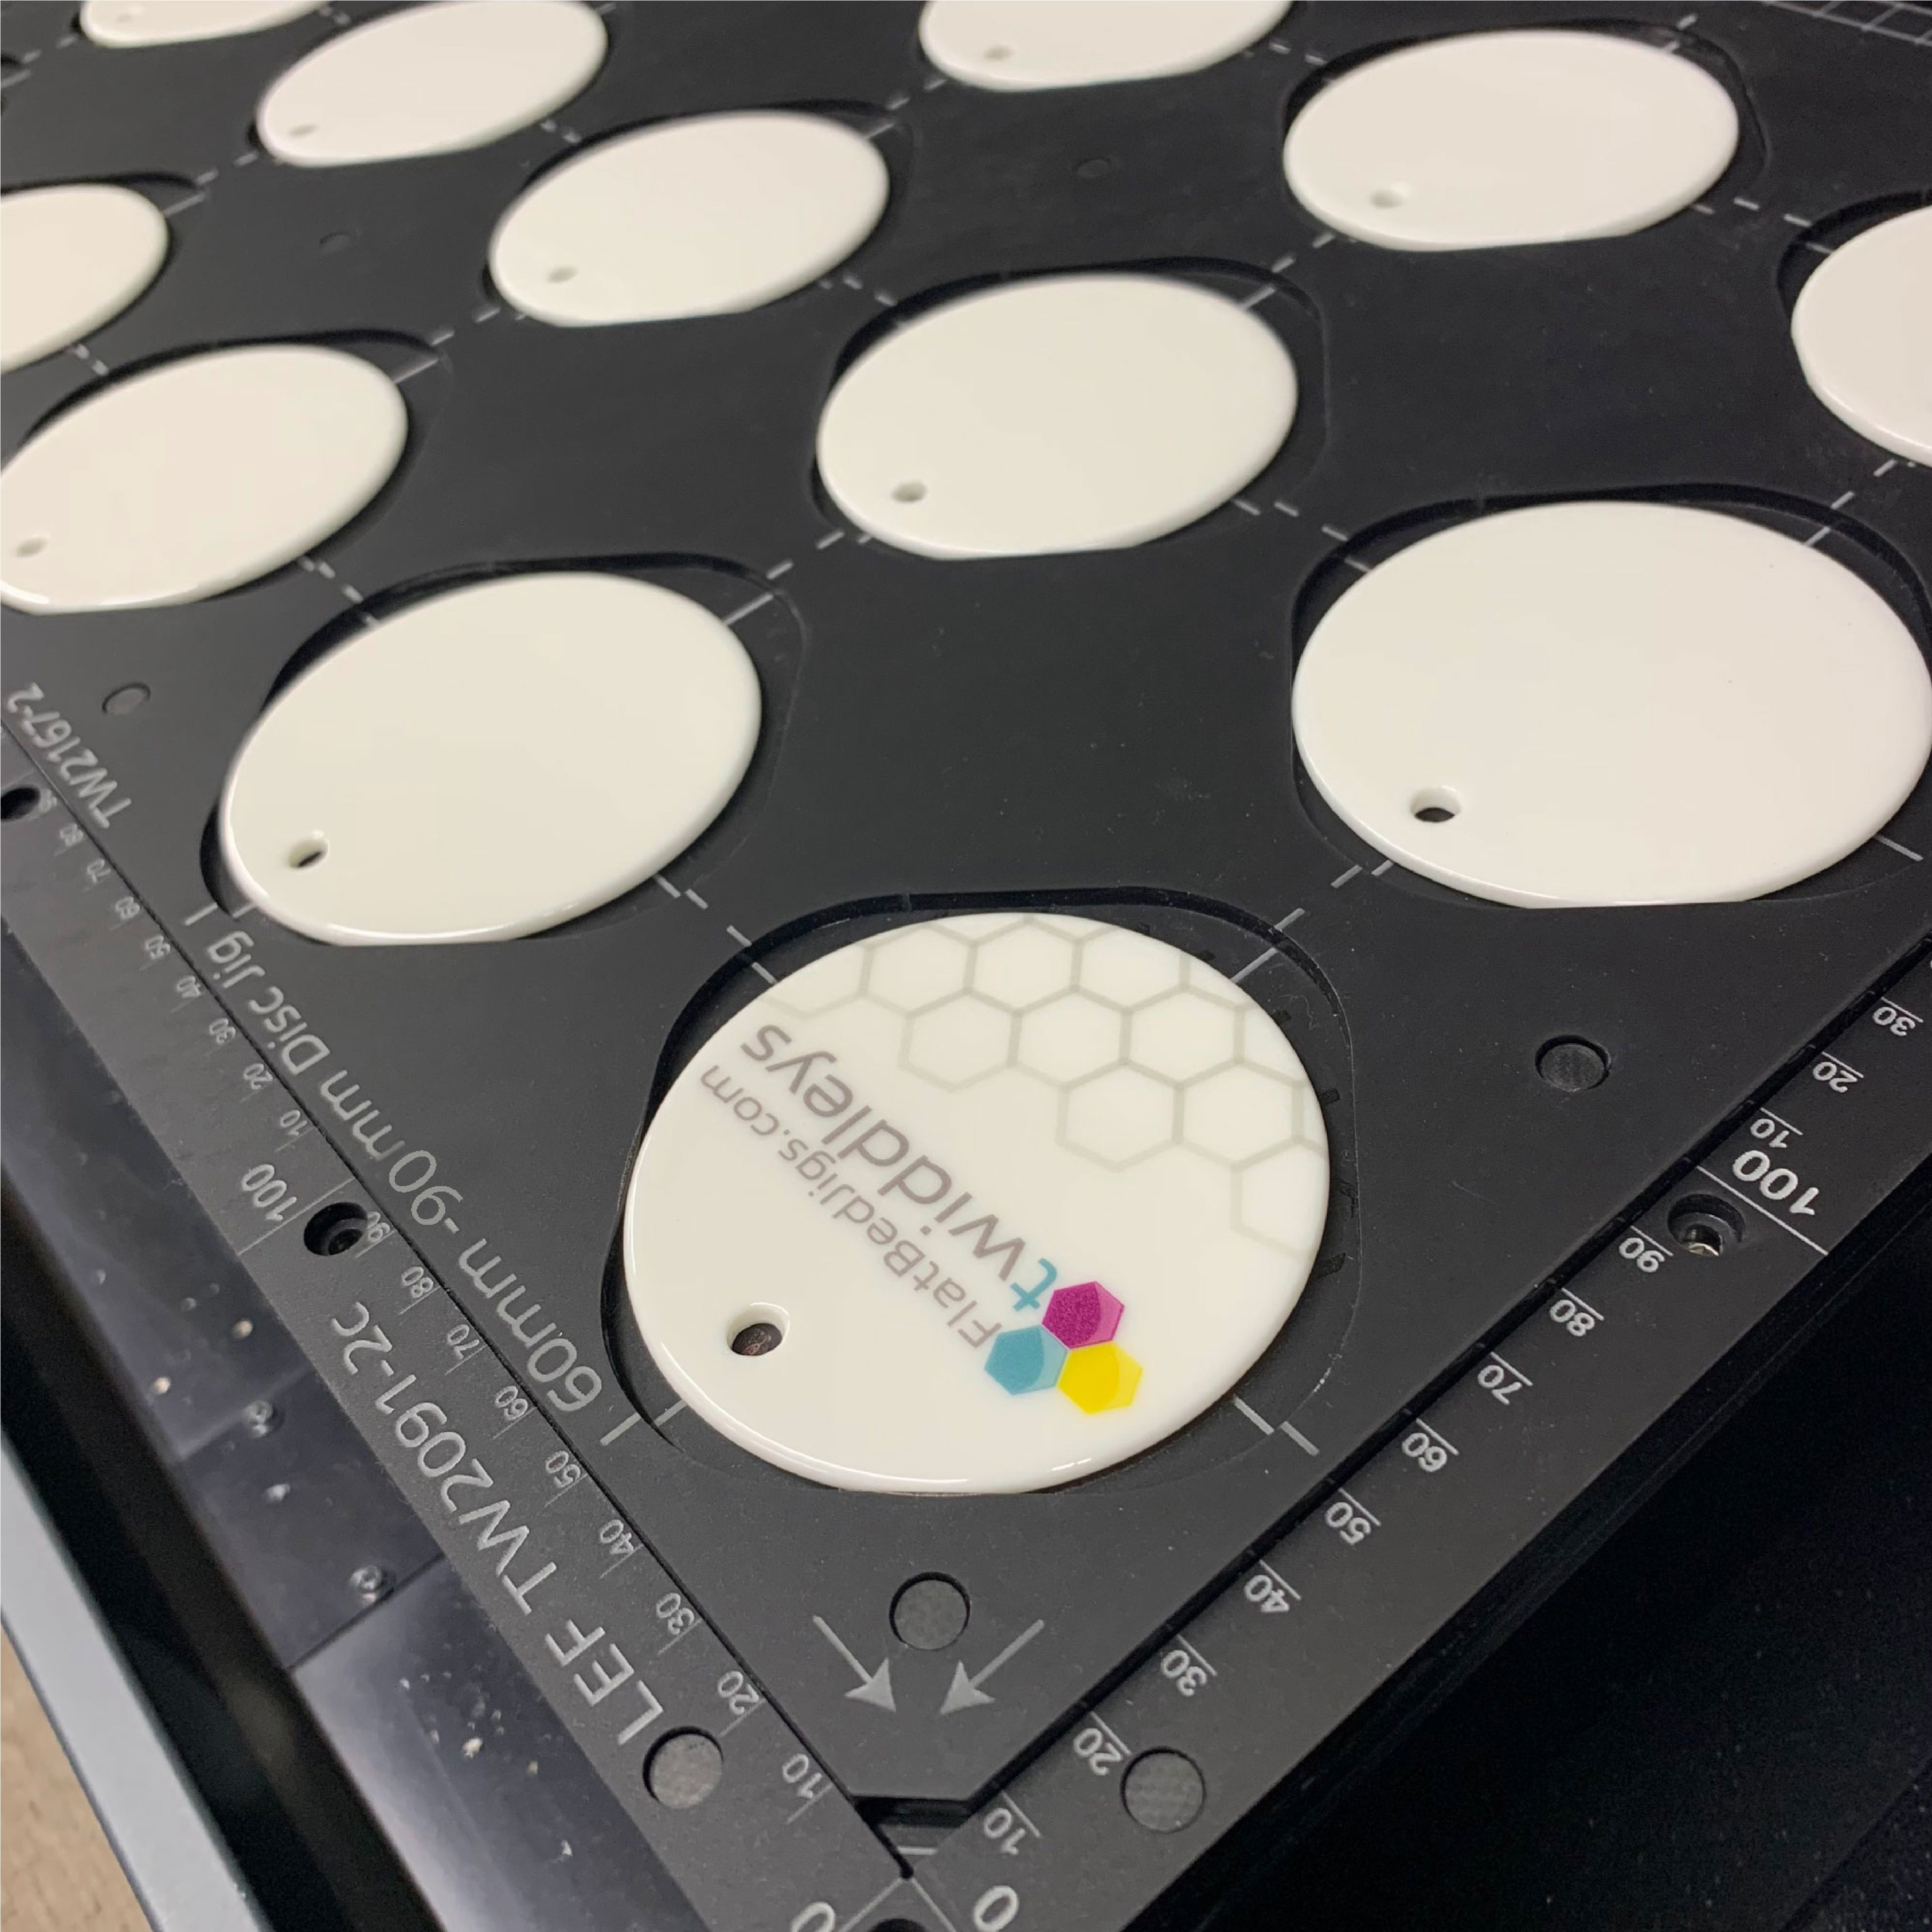 Ceramic Christmas Bauble Printing Jig for Roland MO-240 Flatbed Printer Series: 60mm - 90mm Circular Discs (TBA Spaces)